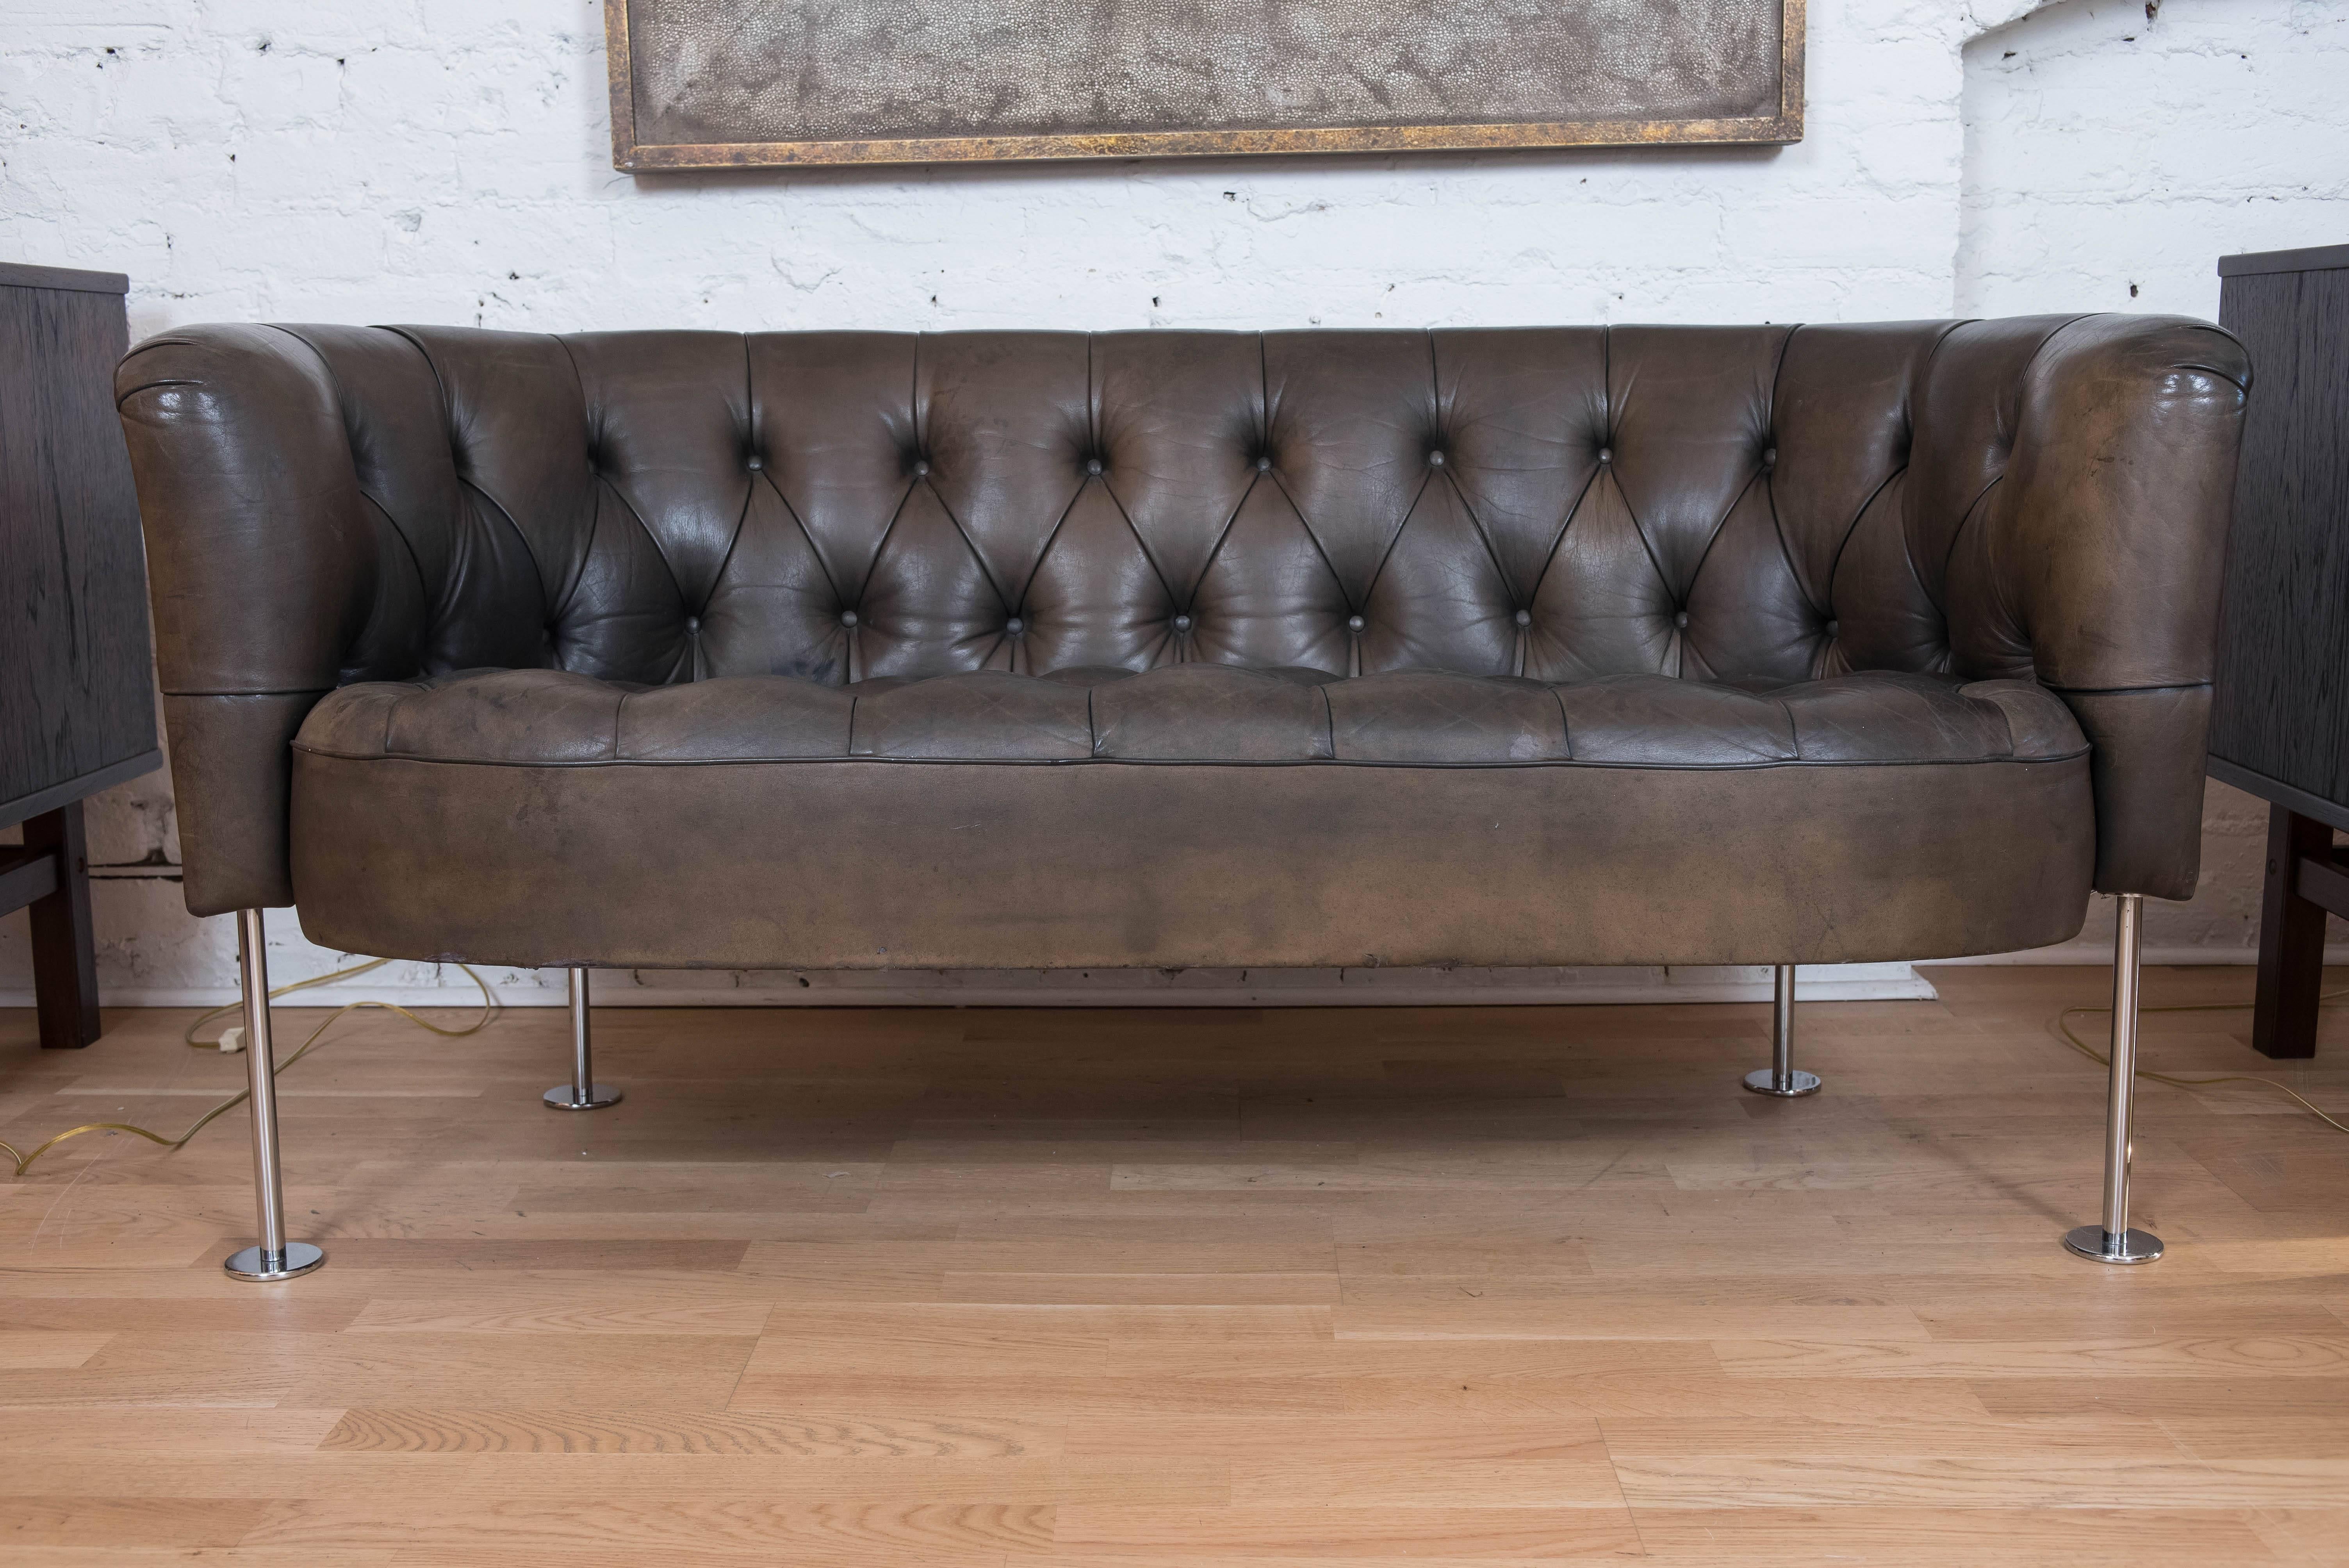 Old world meets modern in this awesome and charming settee.
The leather is soft and rich with that 